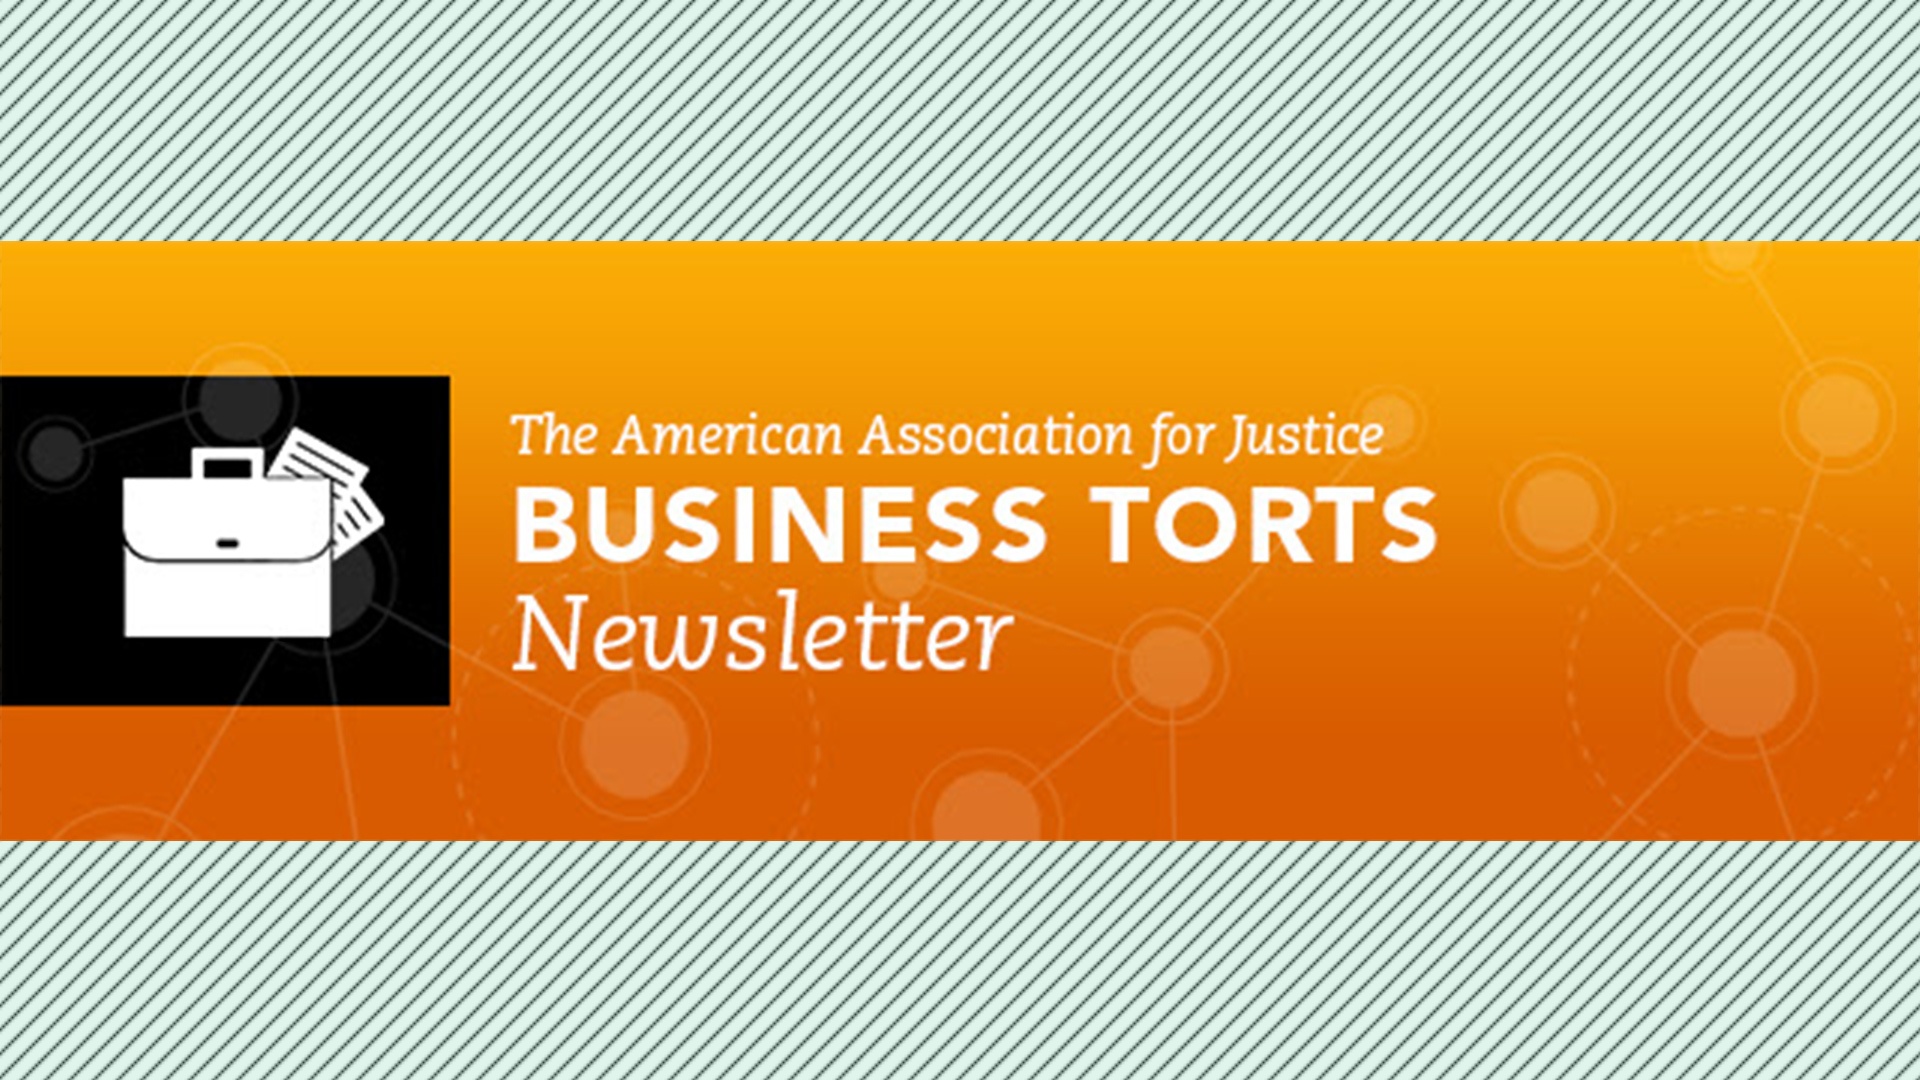 American Association for Justice Business Torts Newsletter Winter 2019